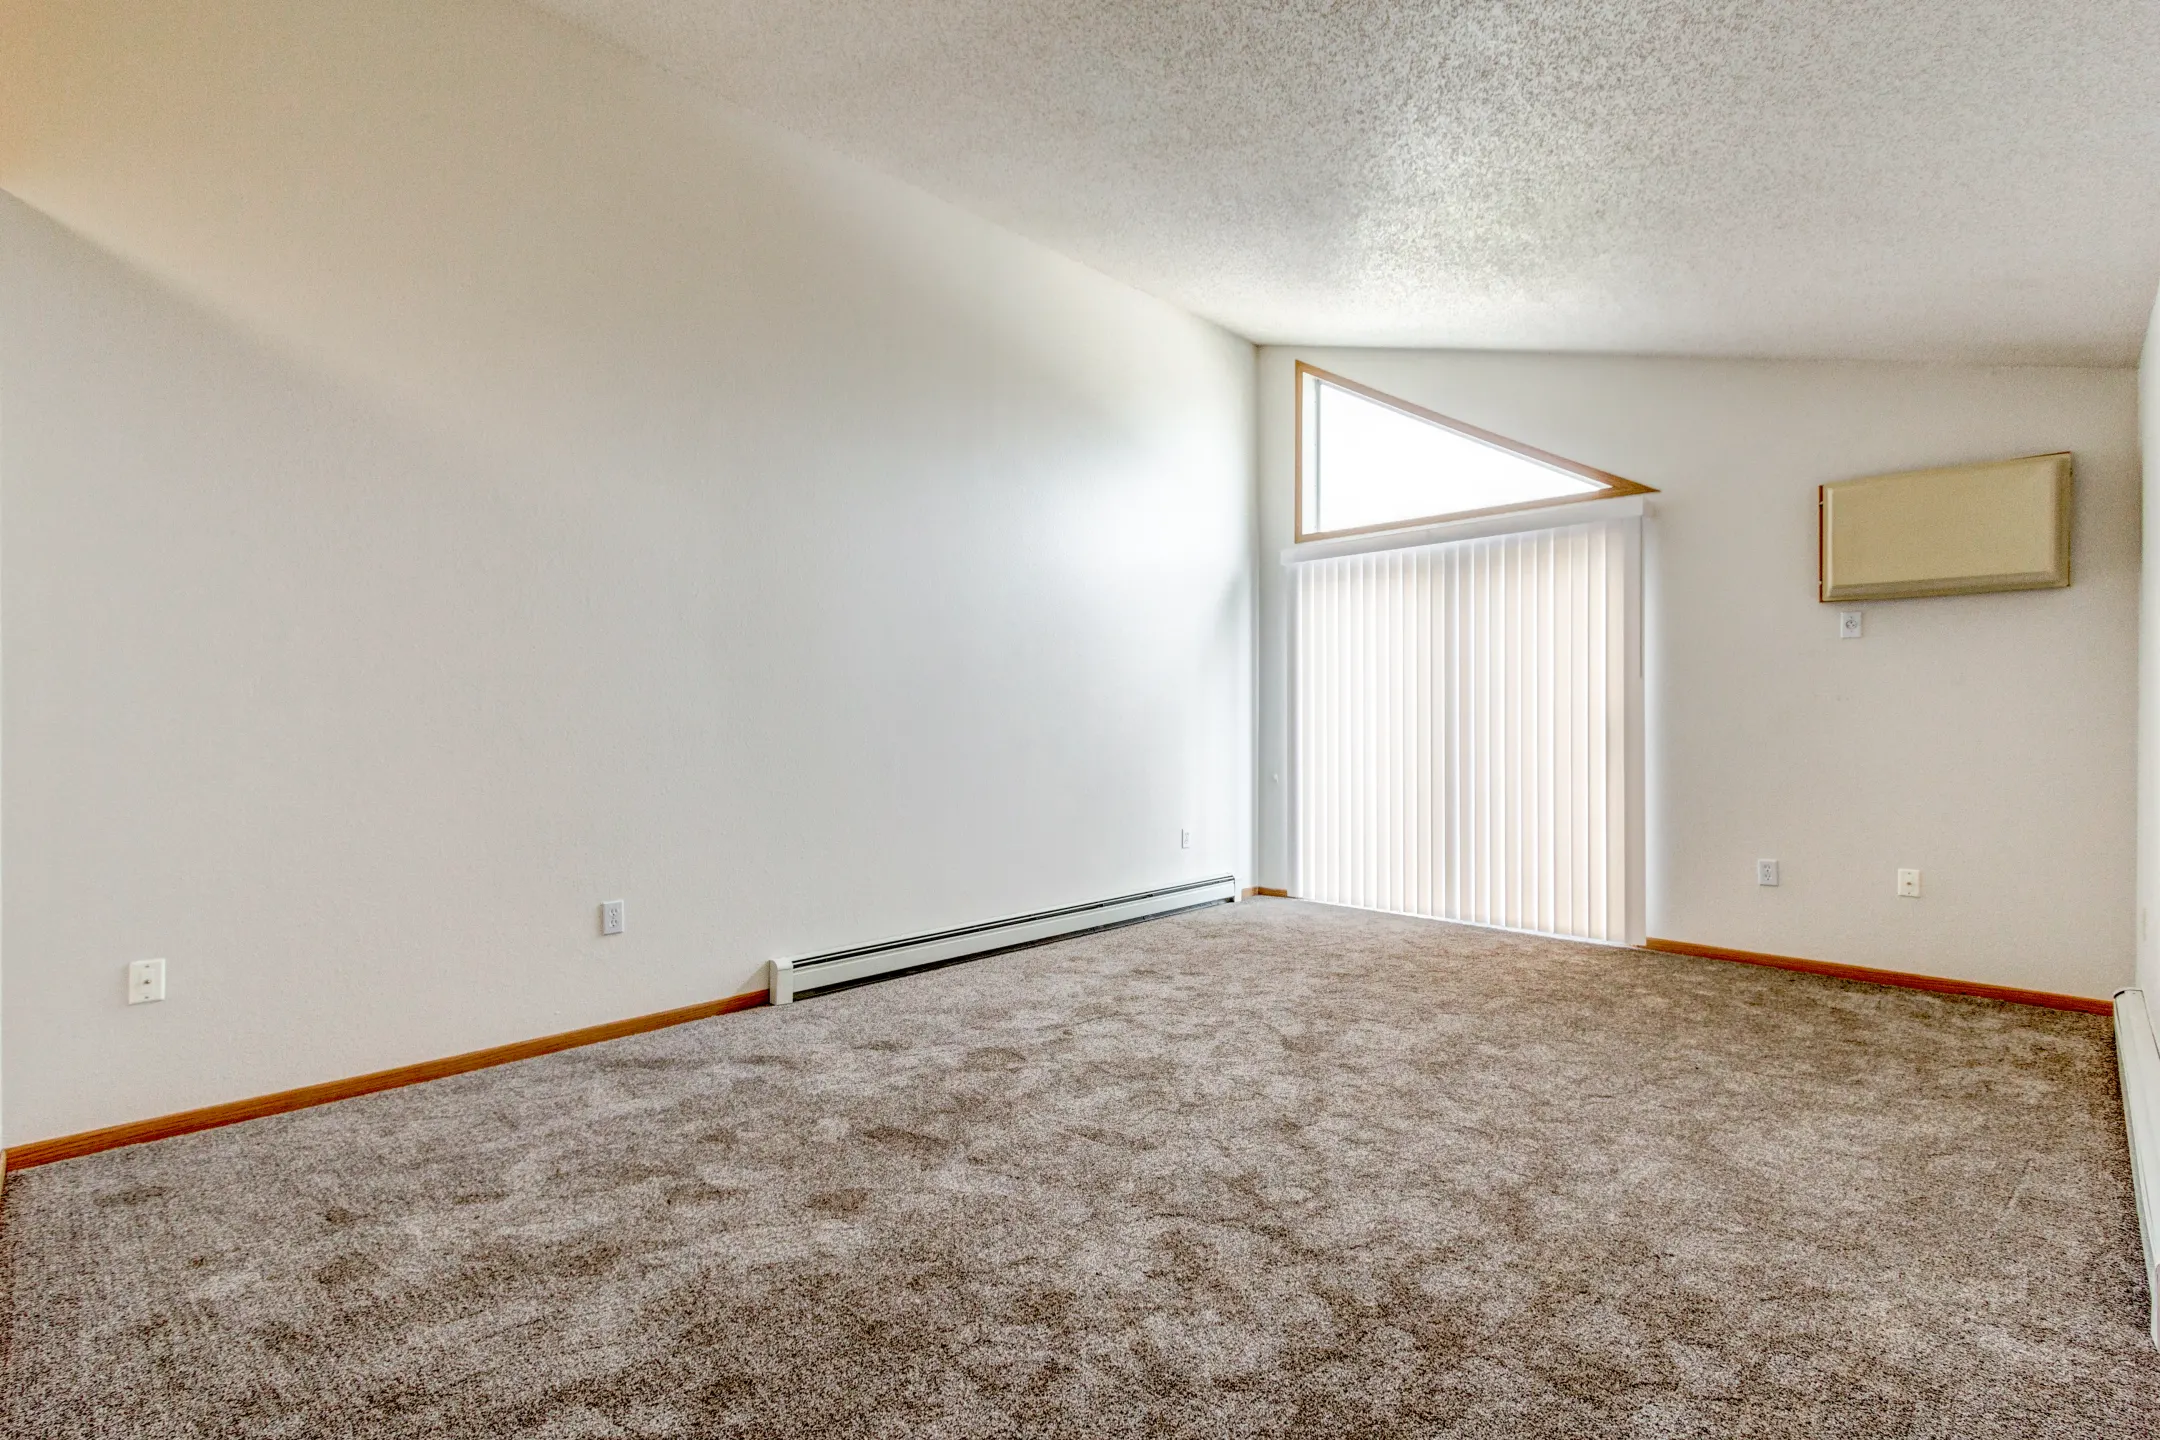 Living Room - Wheatland Place Apartments & Townhomes - Fargo, ND